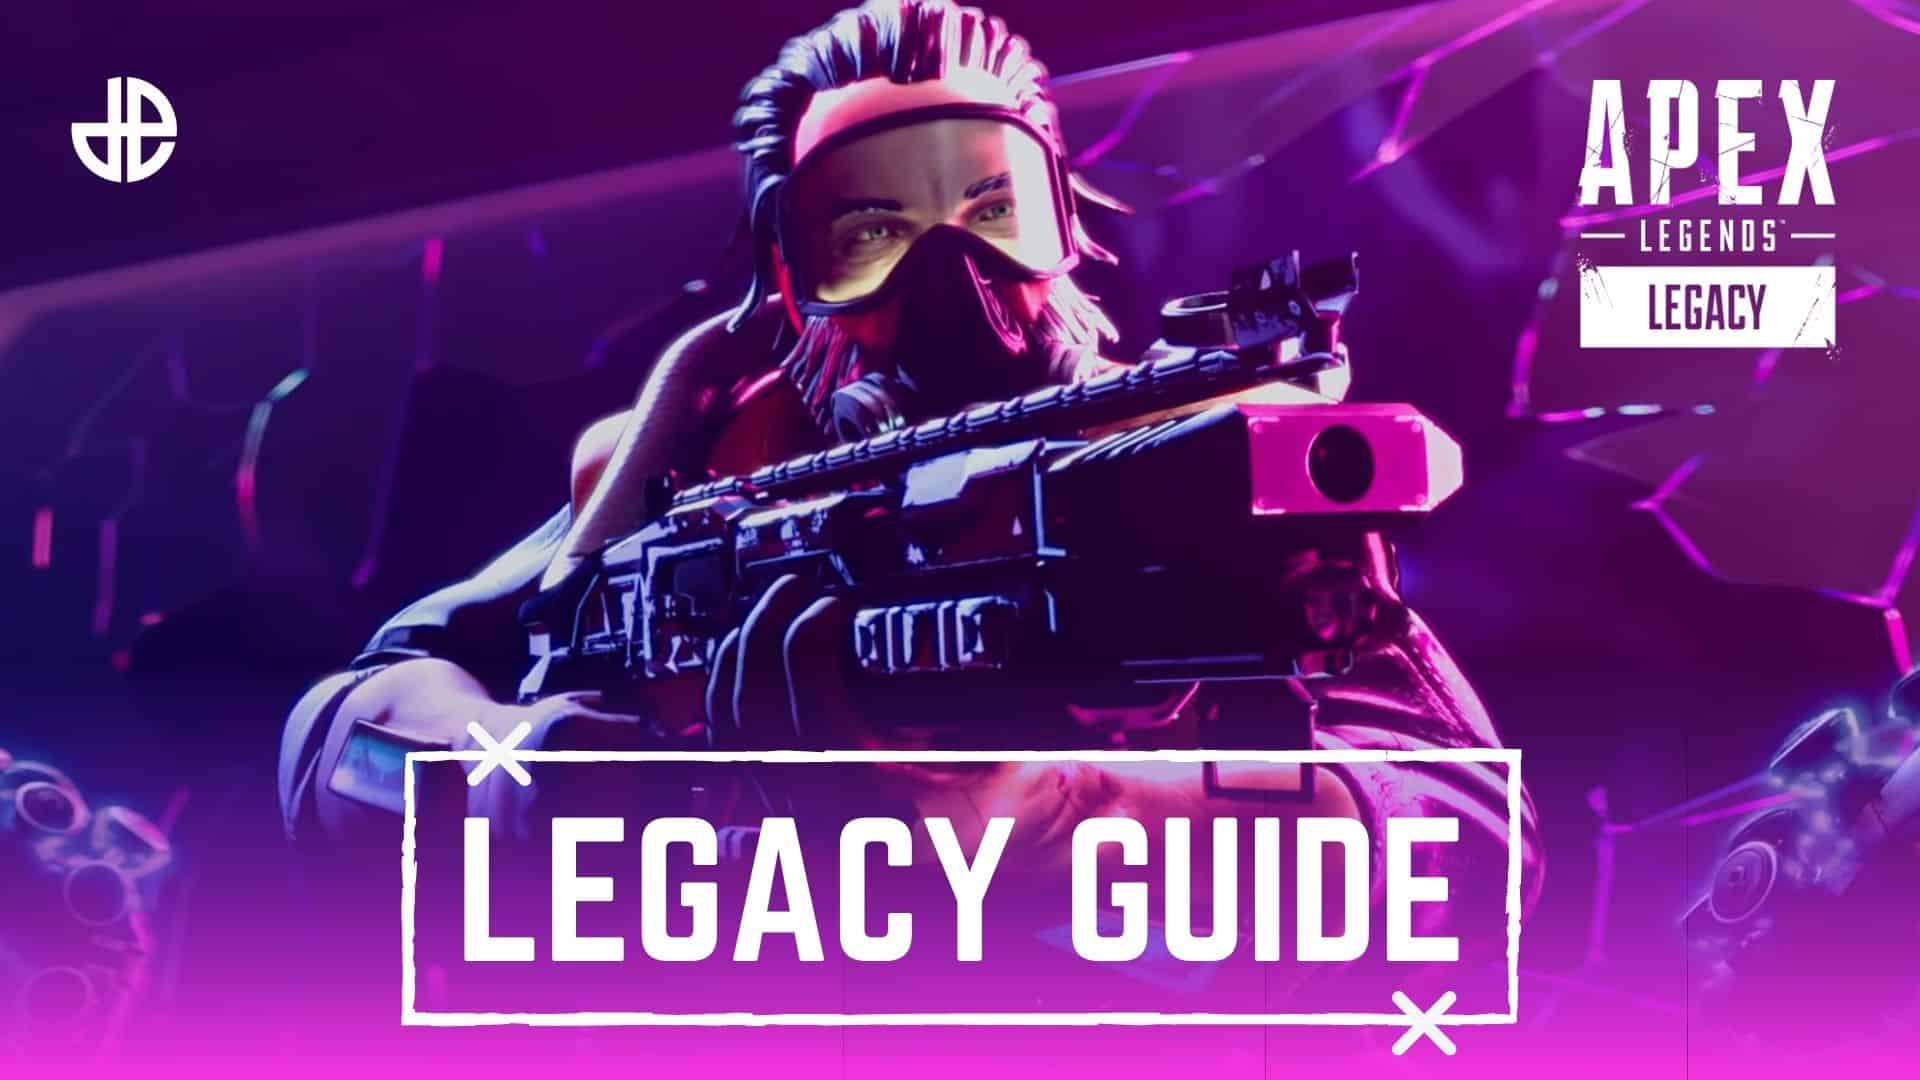 Apex legends season 9 legacy with caustic